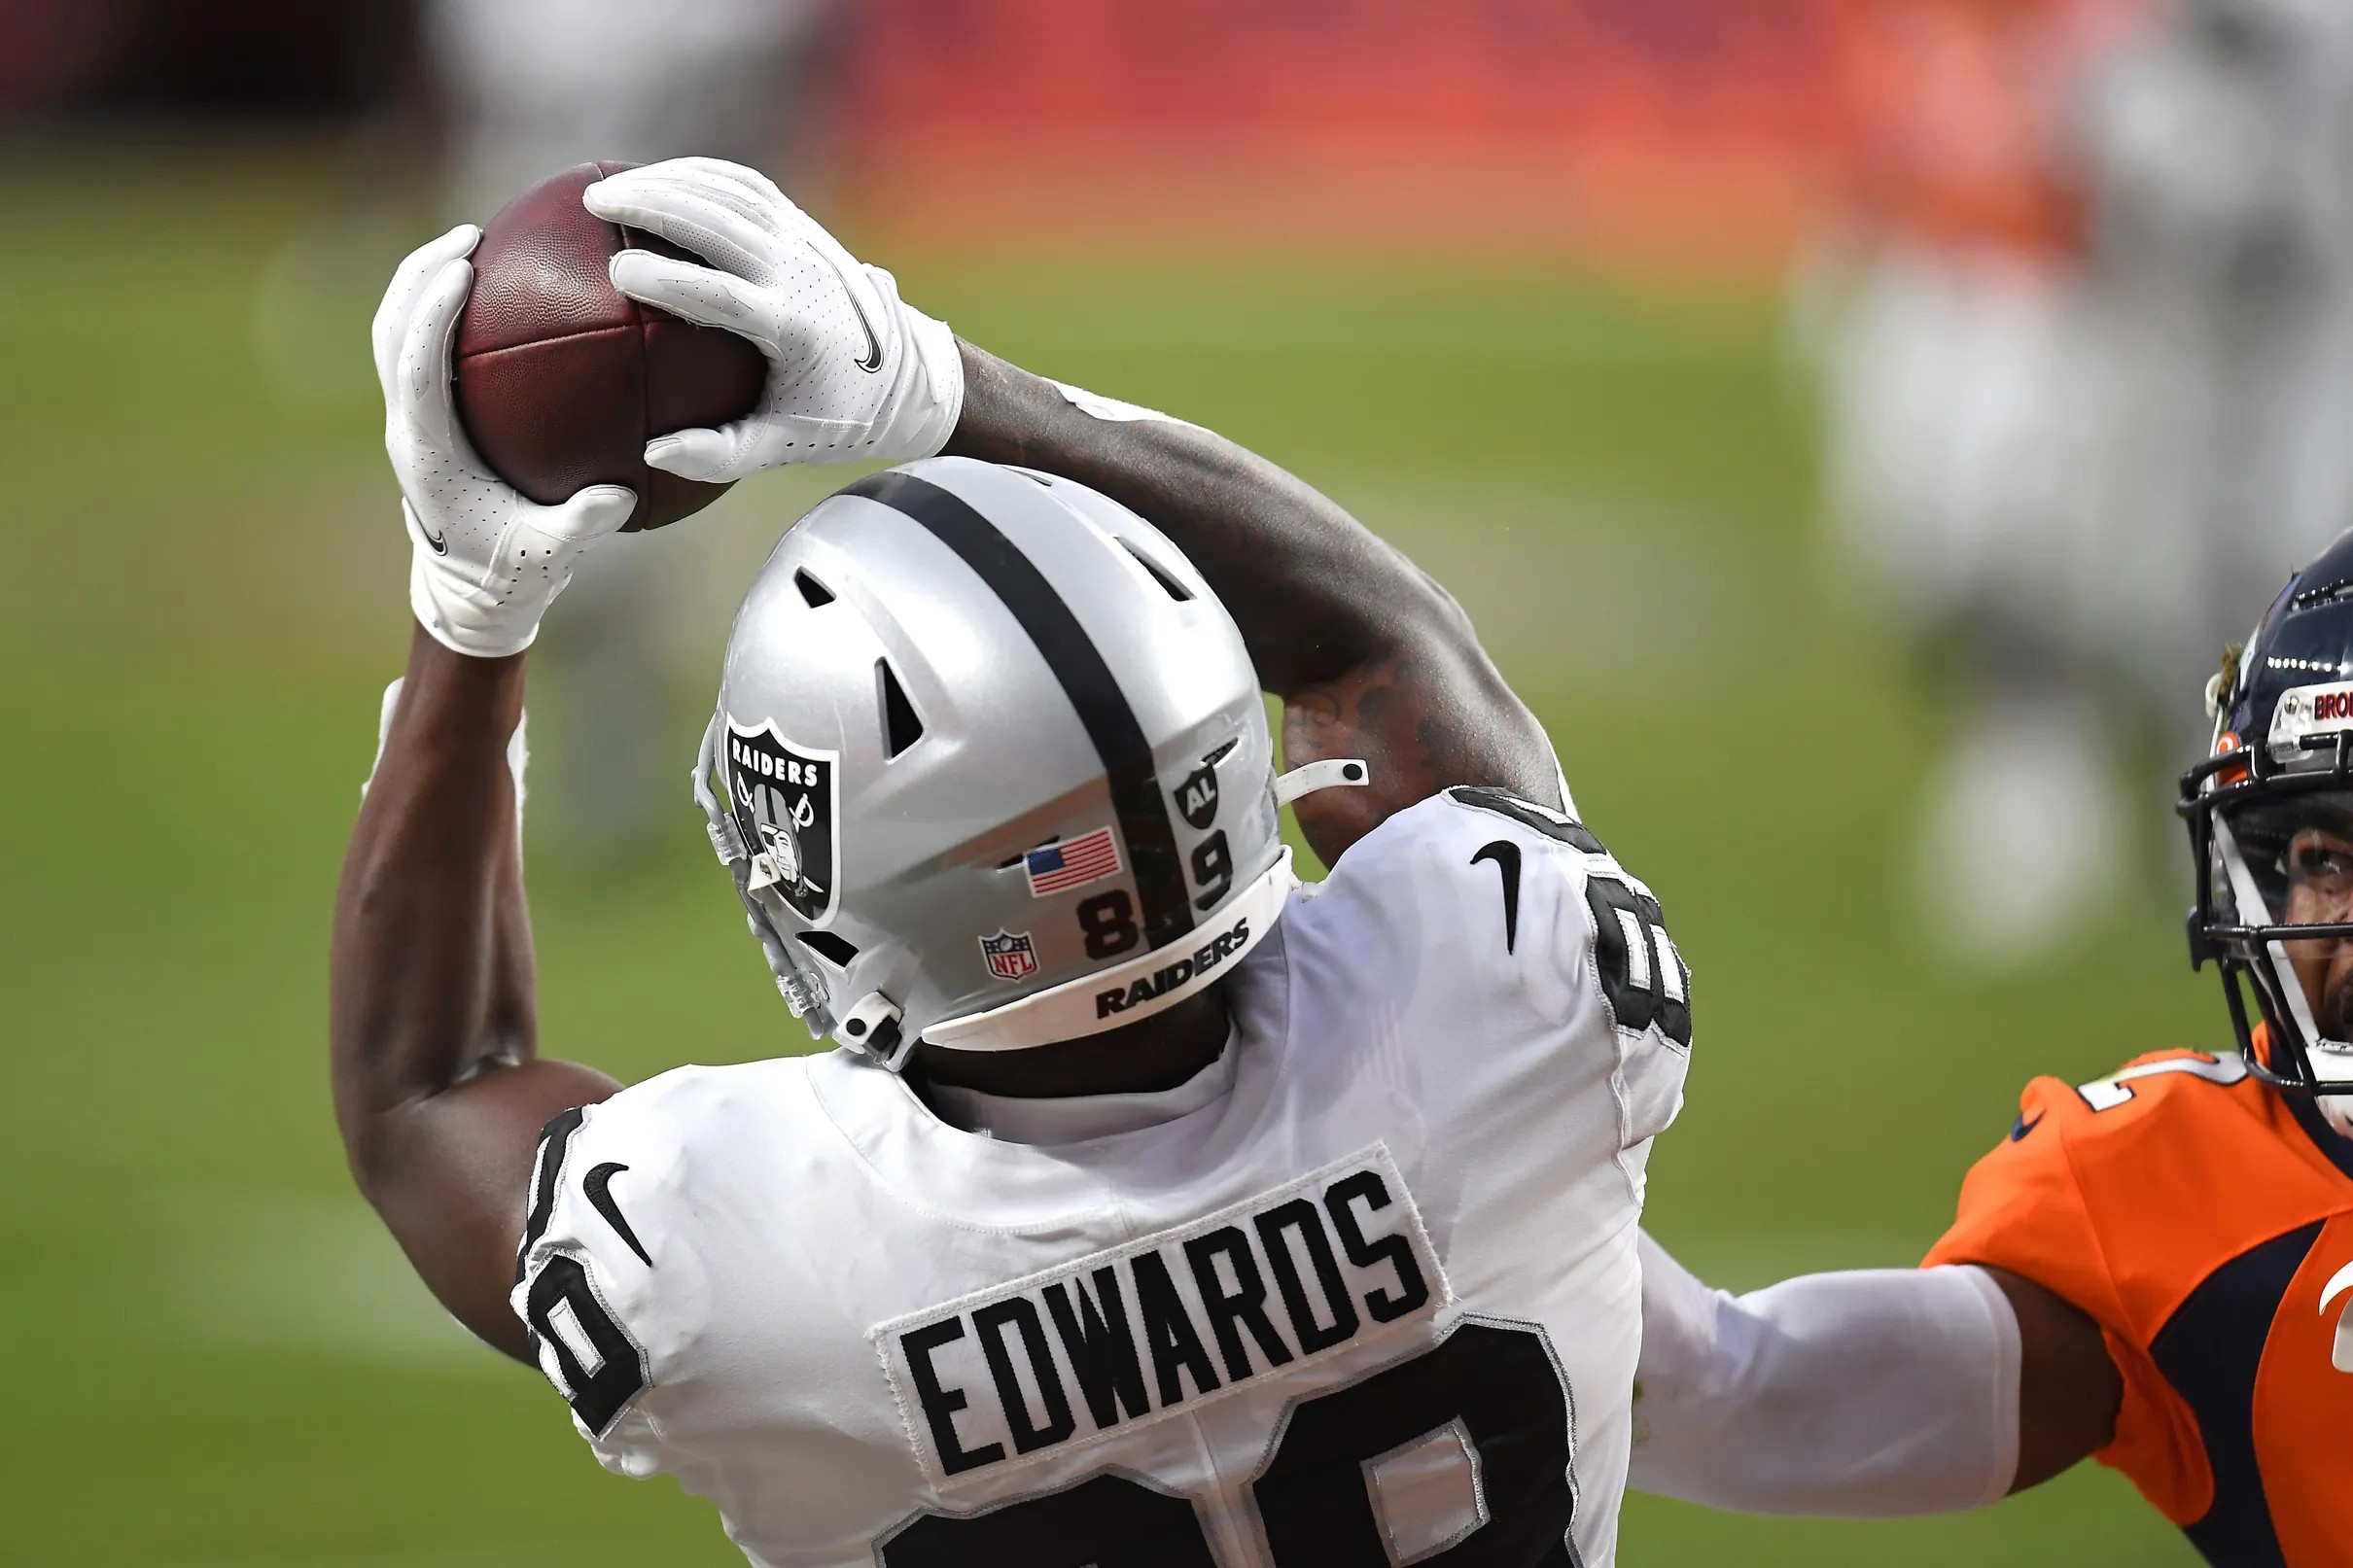 Raiders receiver Bryan Edwards is ready to take the next step